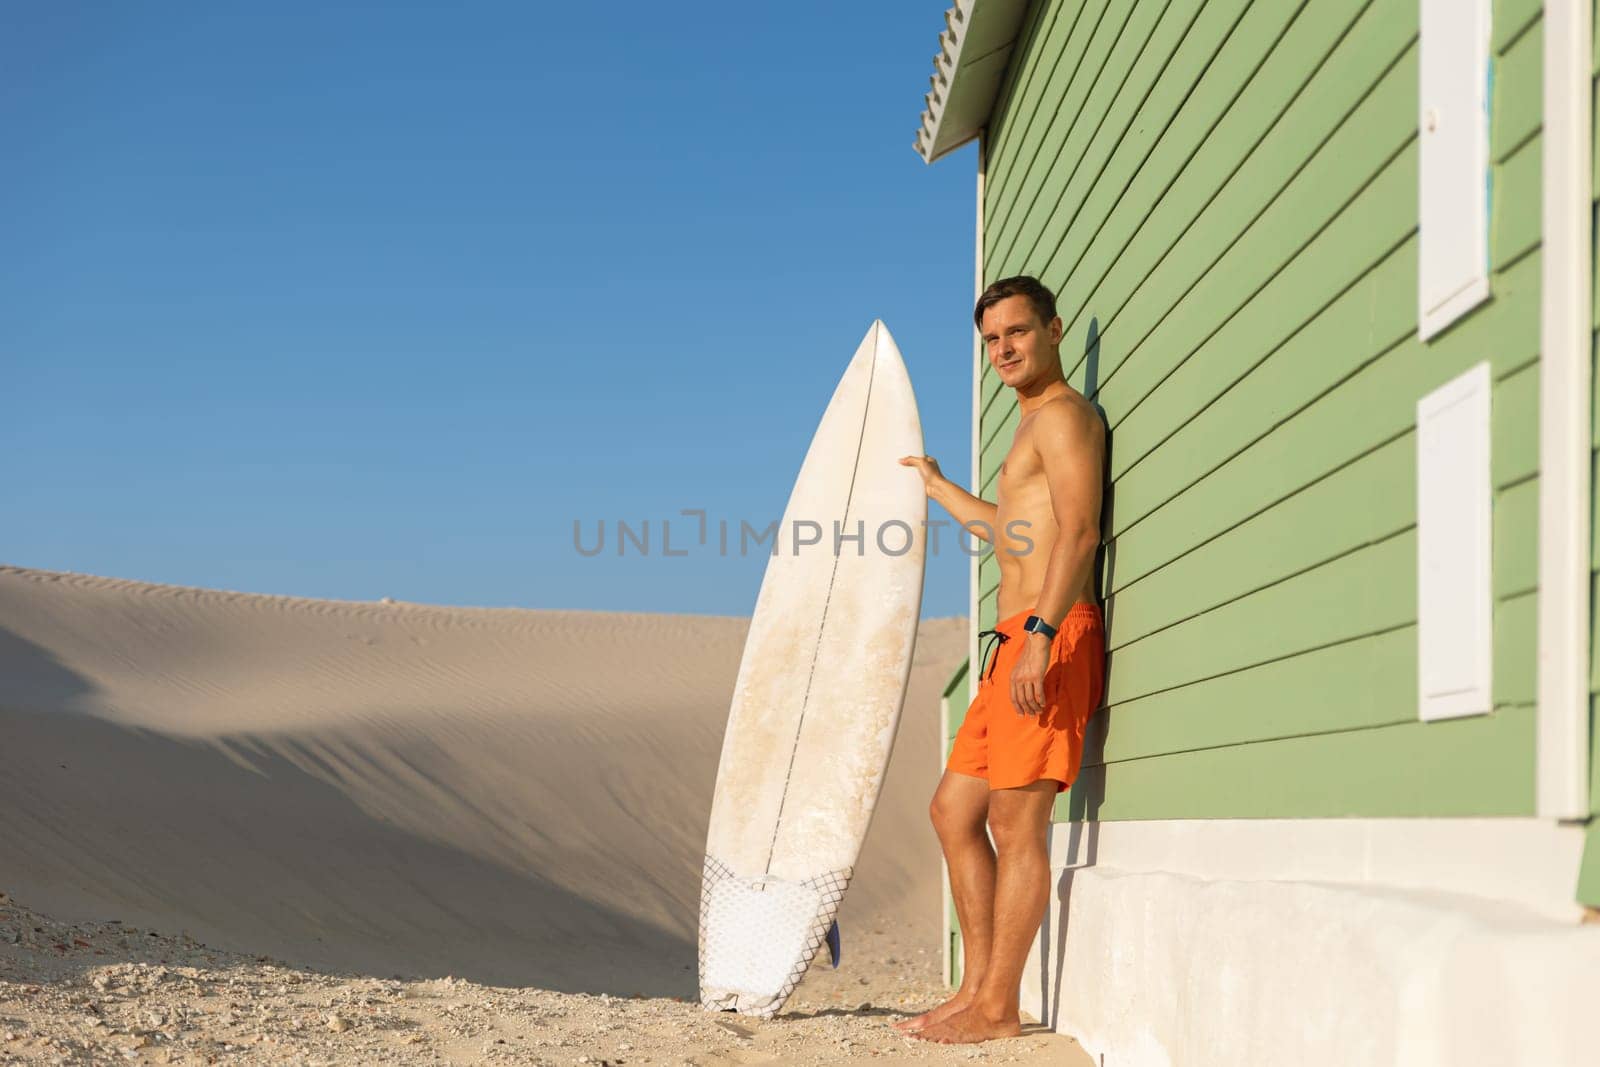 A man surfer standing at the wall of a shore house holding his surfing board. Mid shot